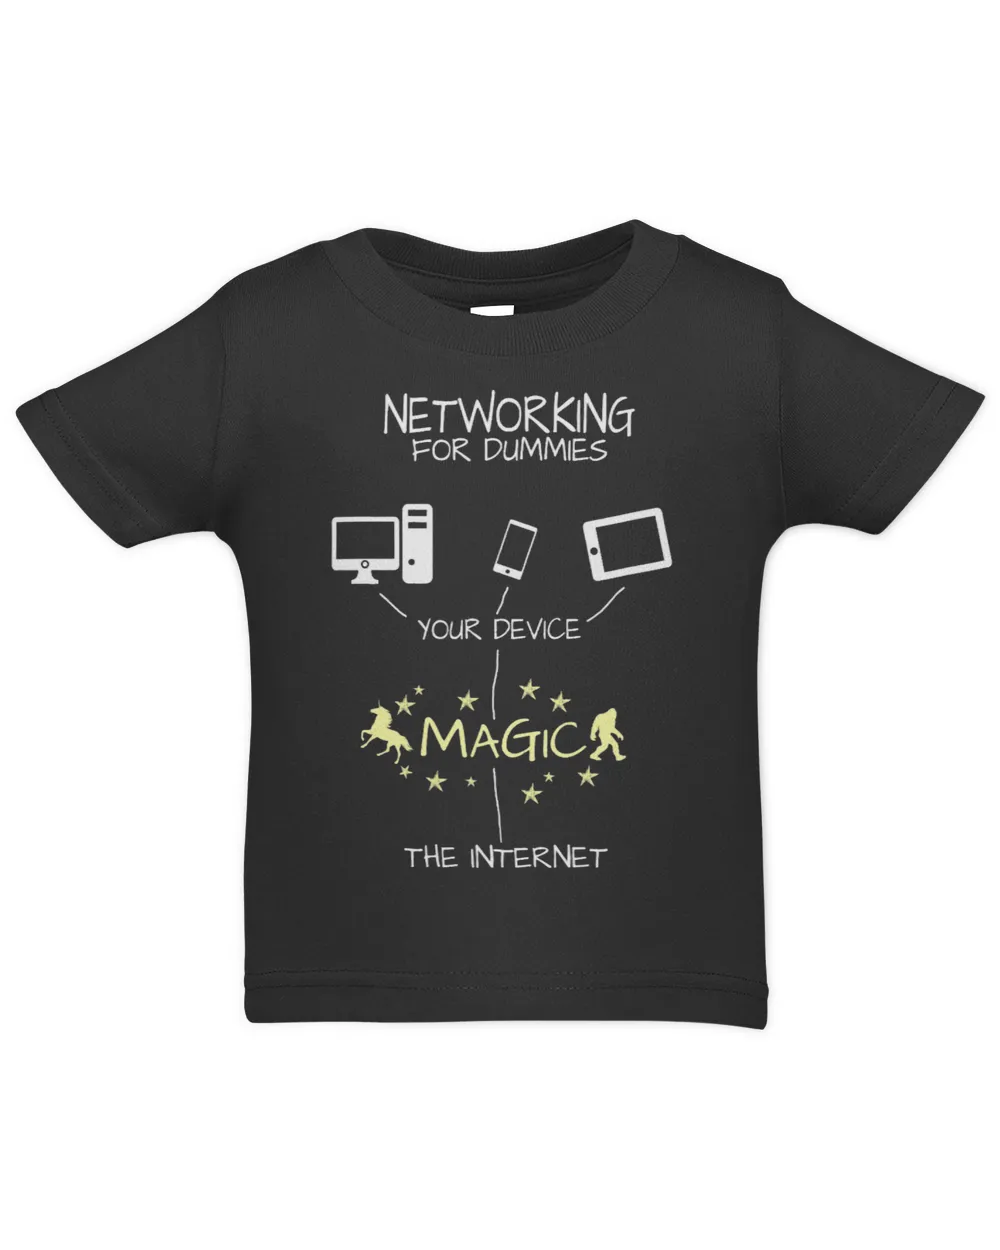 Networking For Dummies Magic Internet Funny